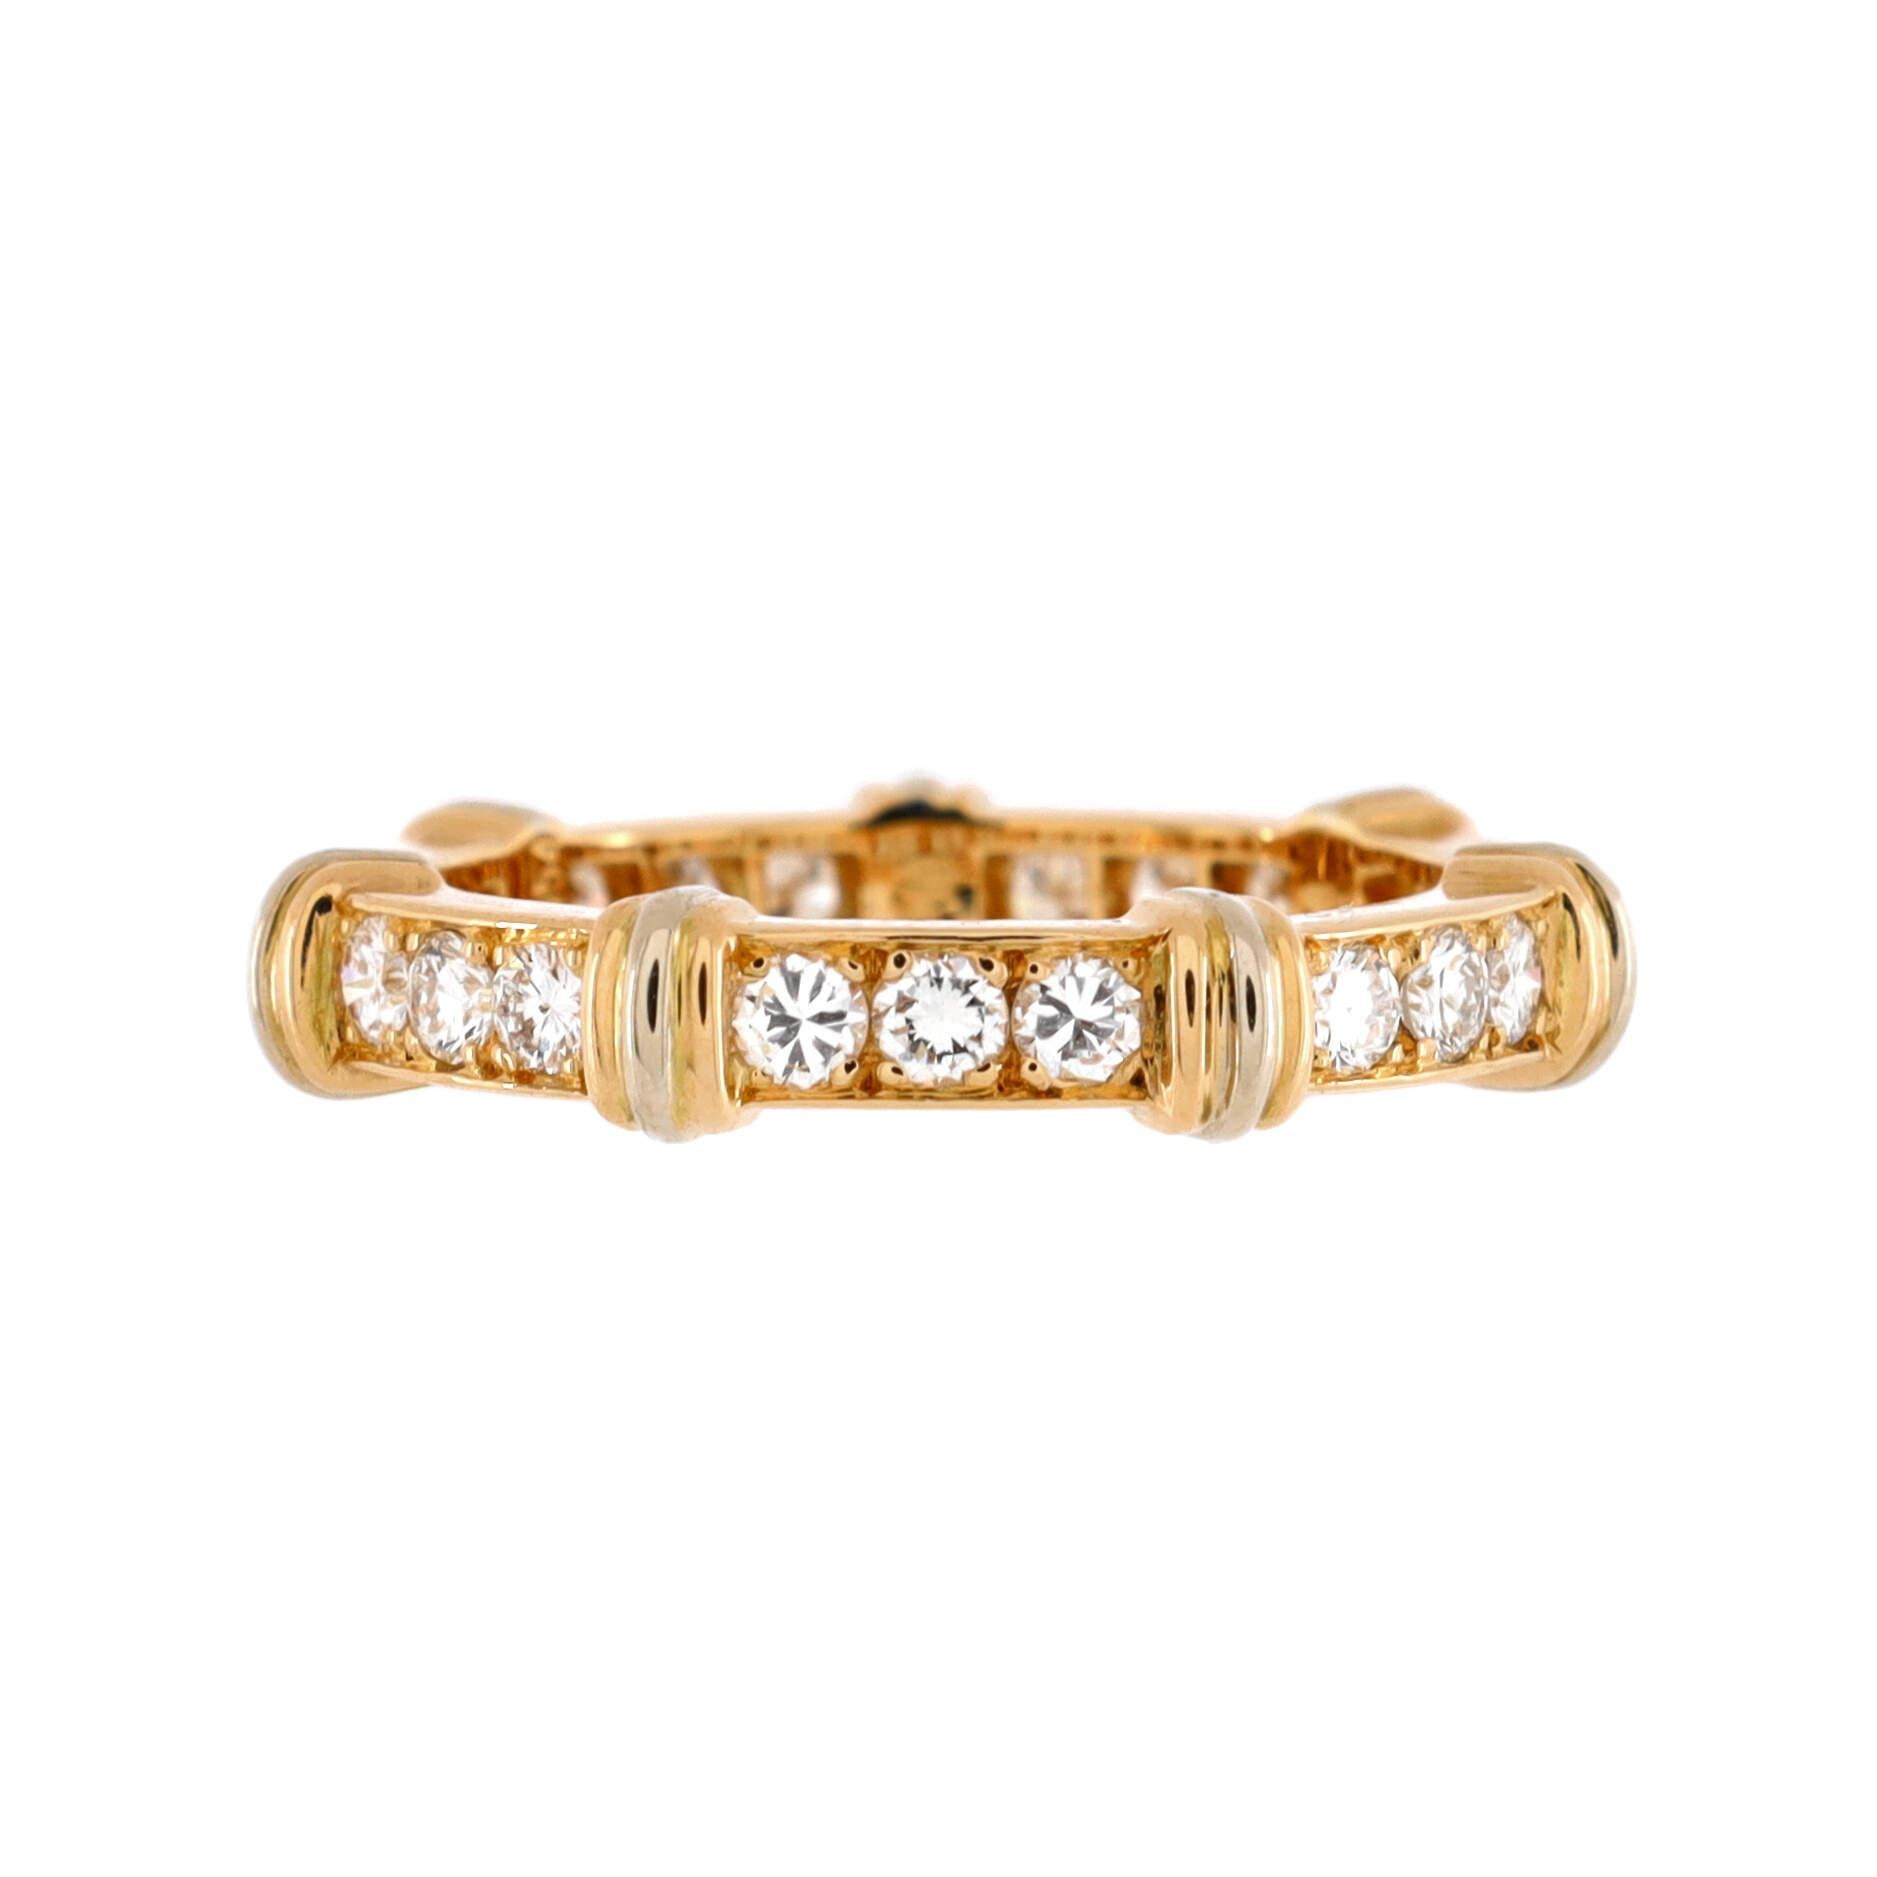 Condition: Very good. Minor wear and re-polishing throughout.
Accessories: No Accessories
Measurements: Size: 6.75 - 54, Width: 4.25 mm
Designer: Cartier
Model: Contessa Eternity Band Ring 18K White Gold and 18K Yellow Gold and Pave